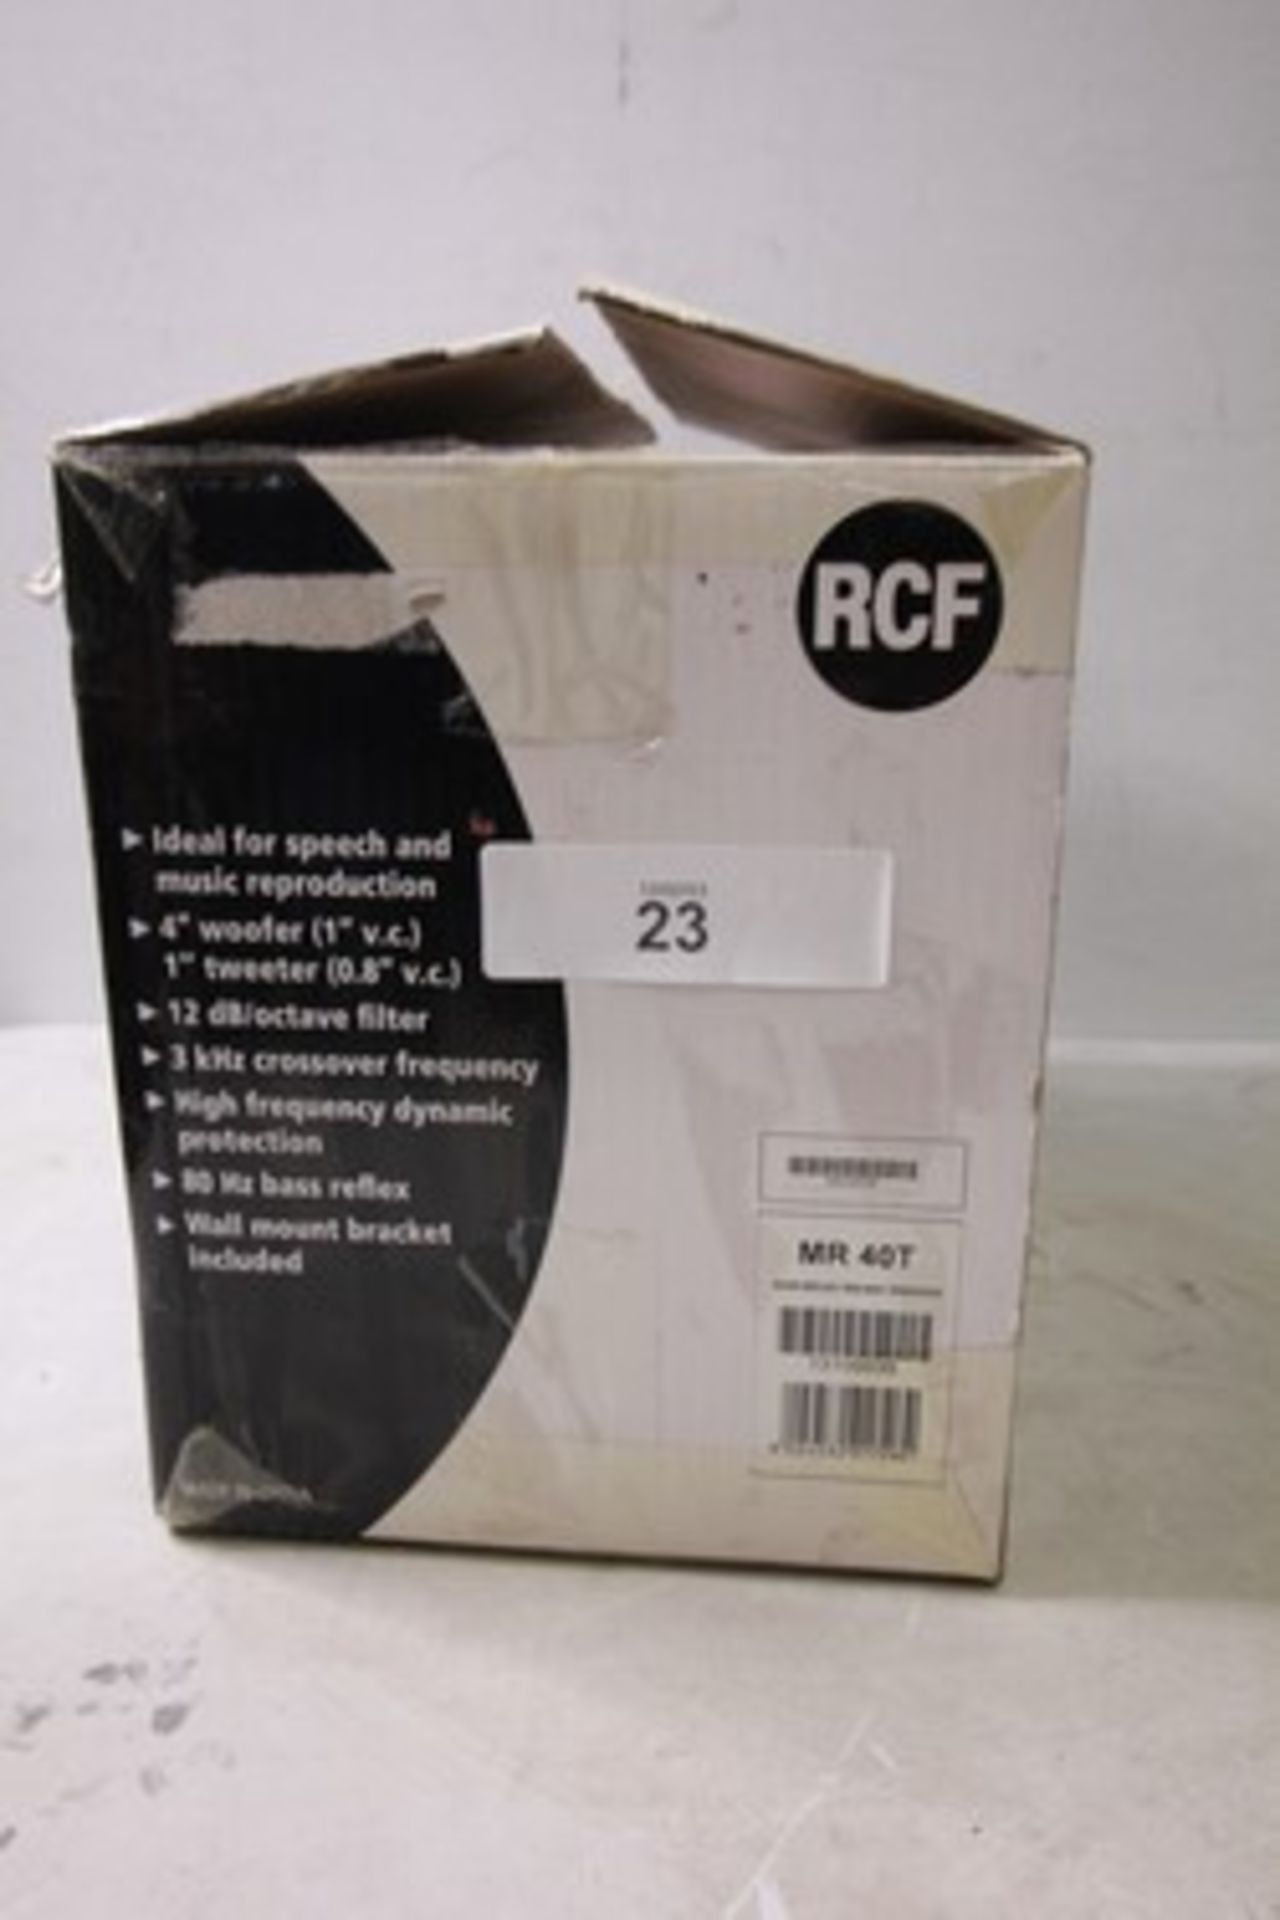 1 x pair of RCF MR 40T 100V Line speakers - New in box (ES1) - Image 3 of 3